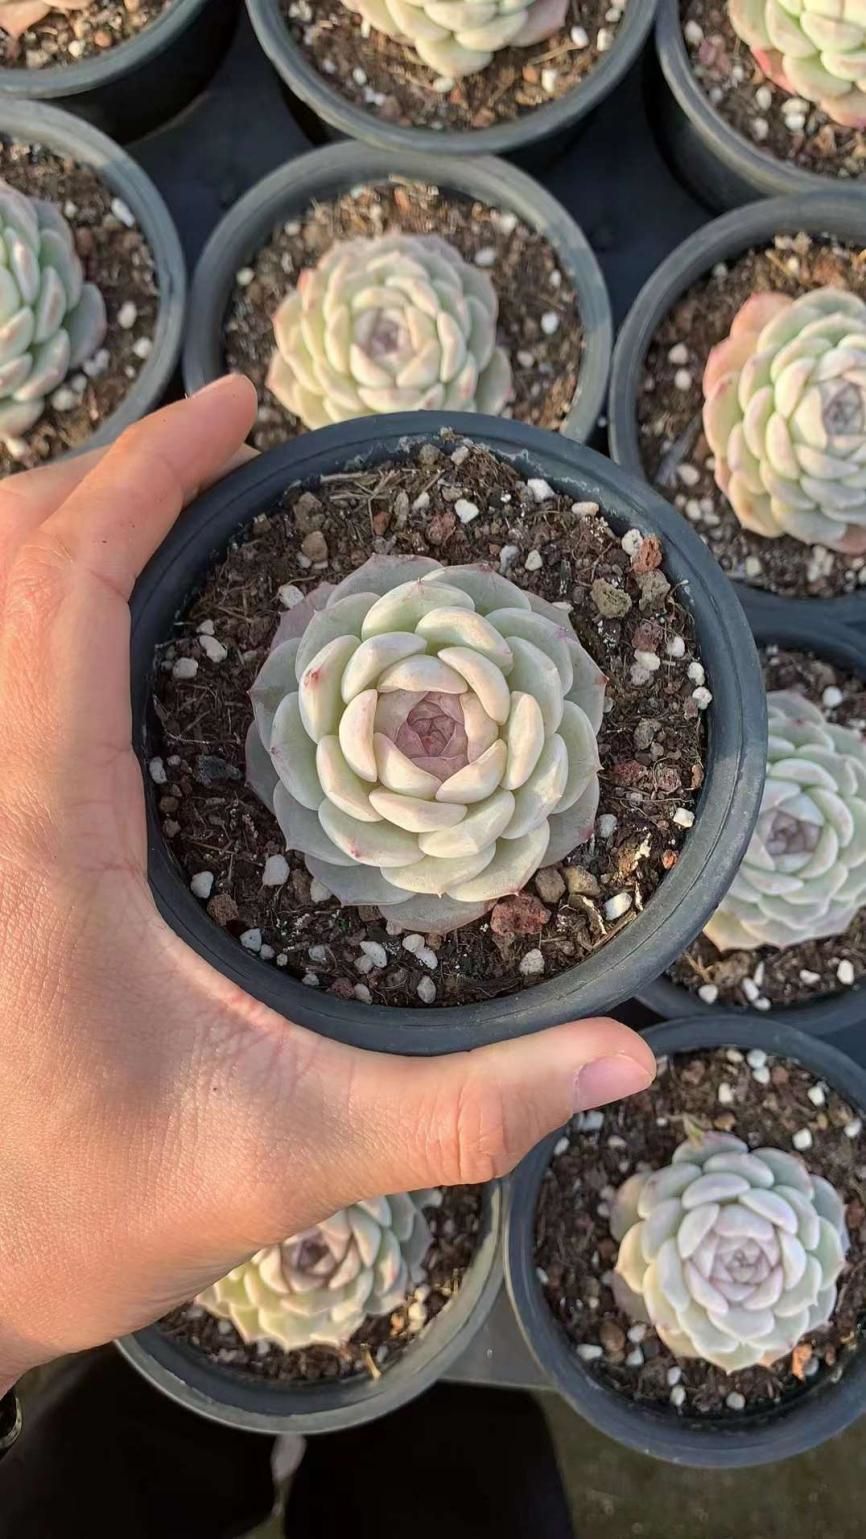 How to raise succulents to grow big and fat